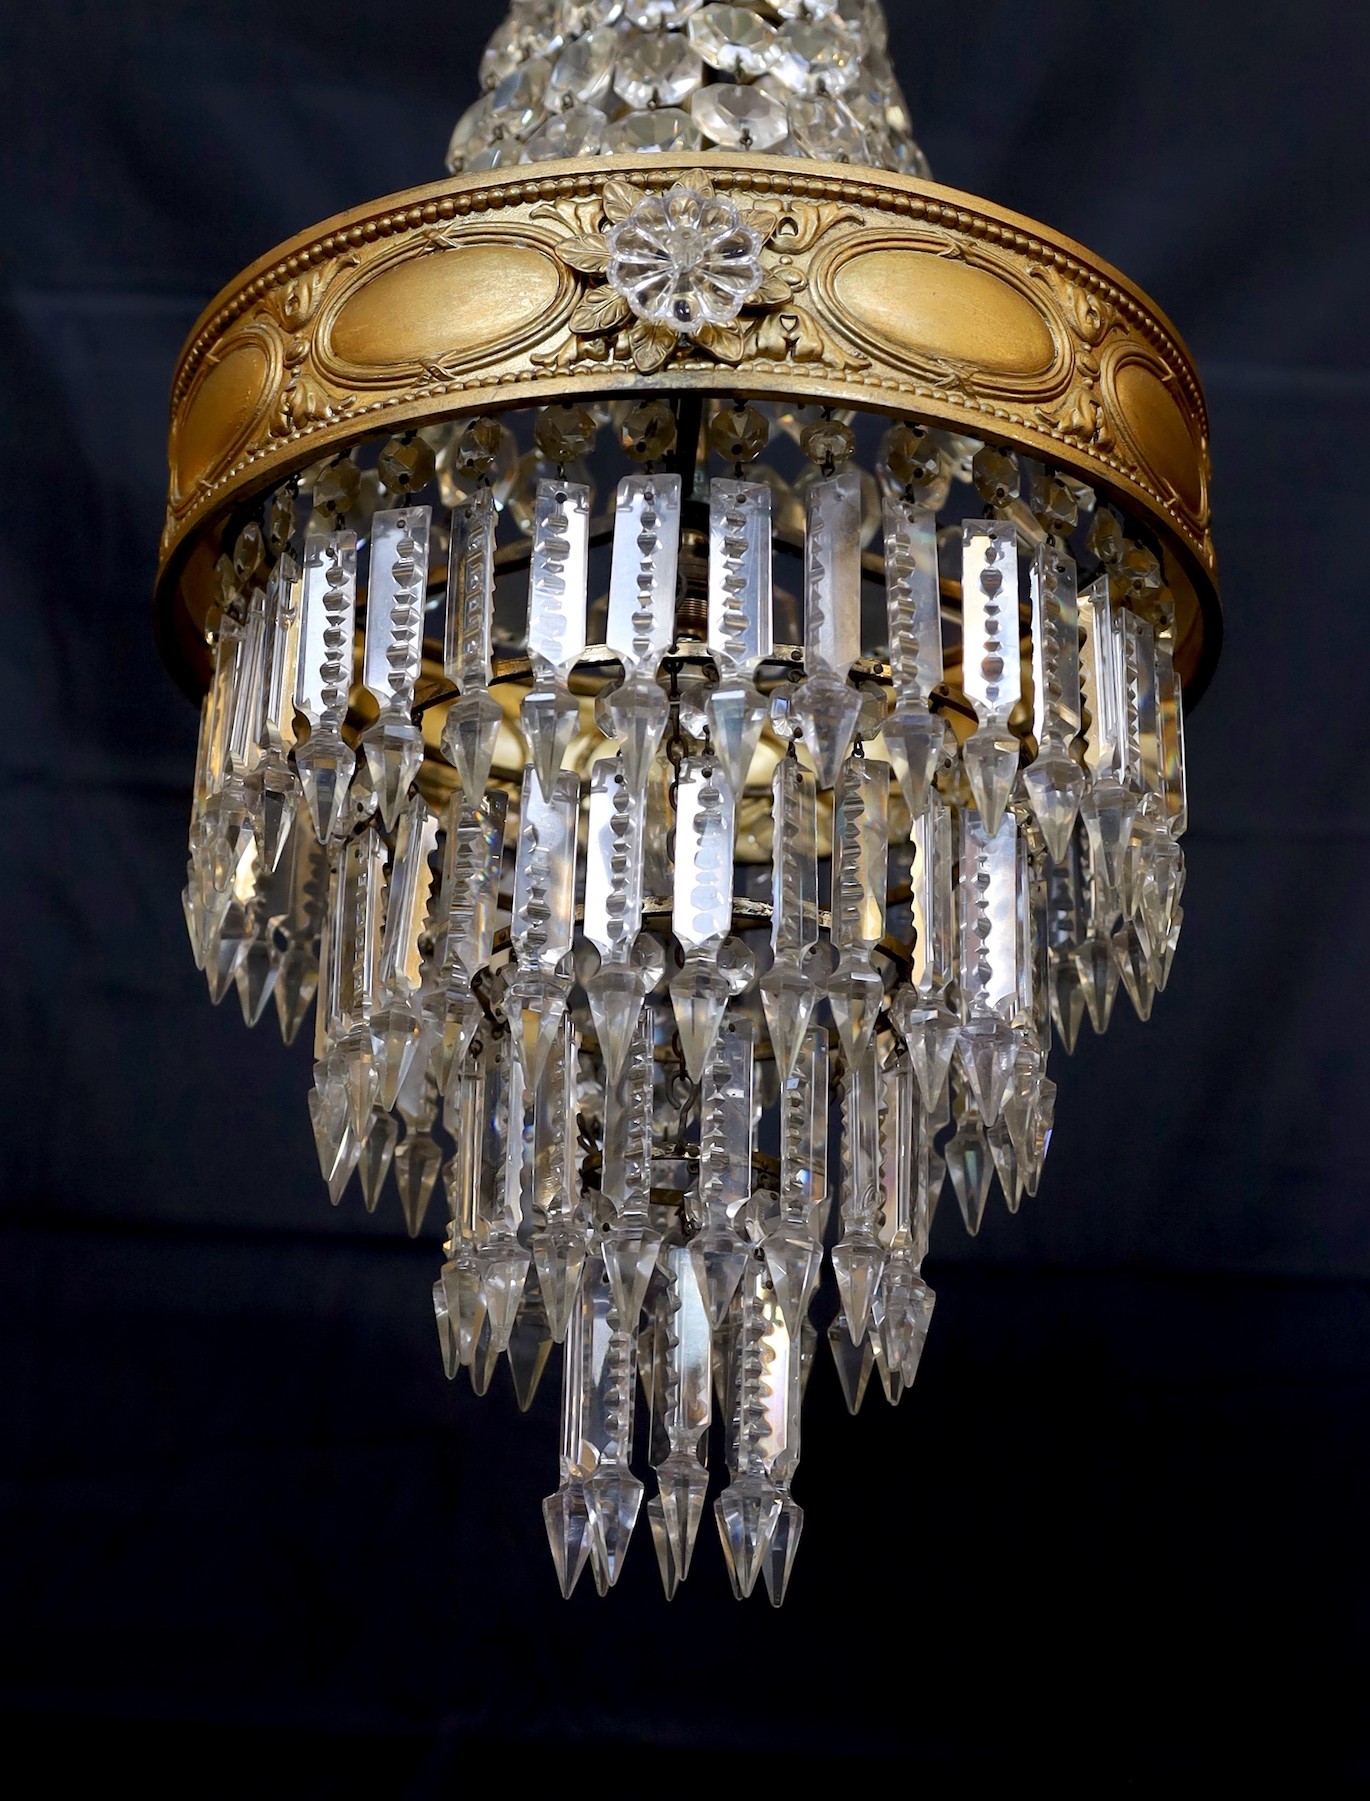 An early 20th century English ormolu and cut glass bag chandelier, hung with octagonal cut drops and spear shaped lustres with four tiers to the base, height 75cm. diameter 35cm